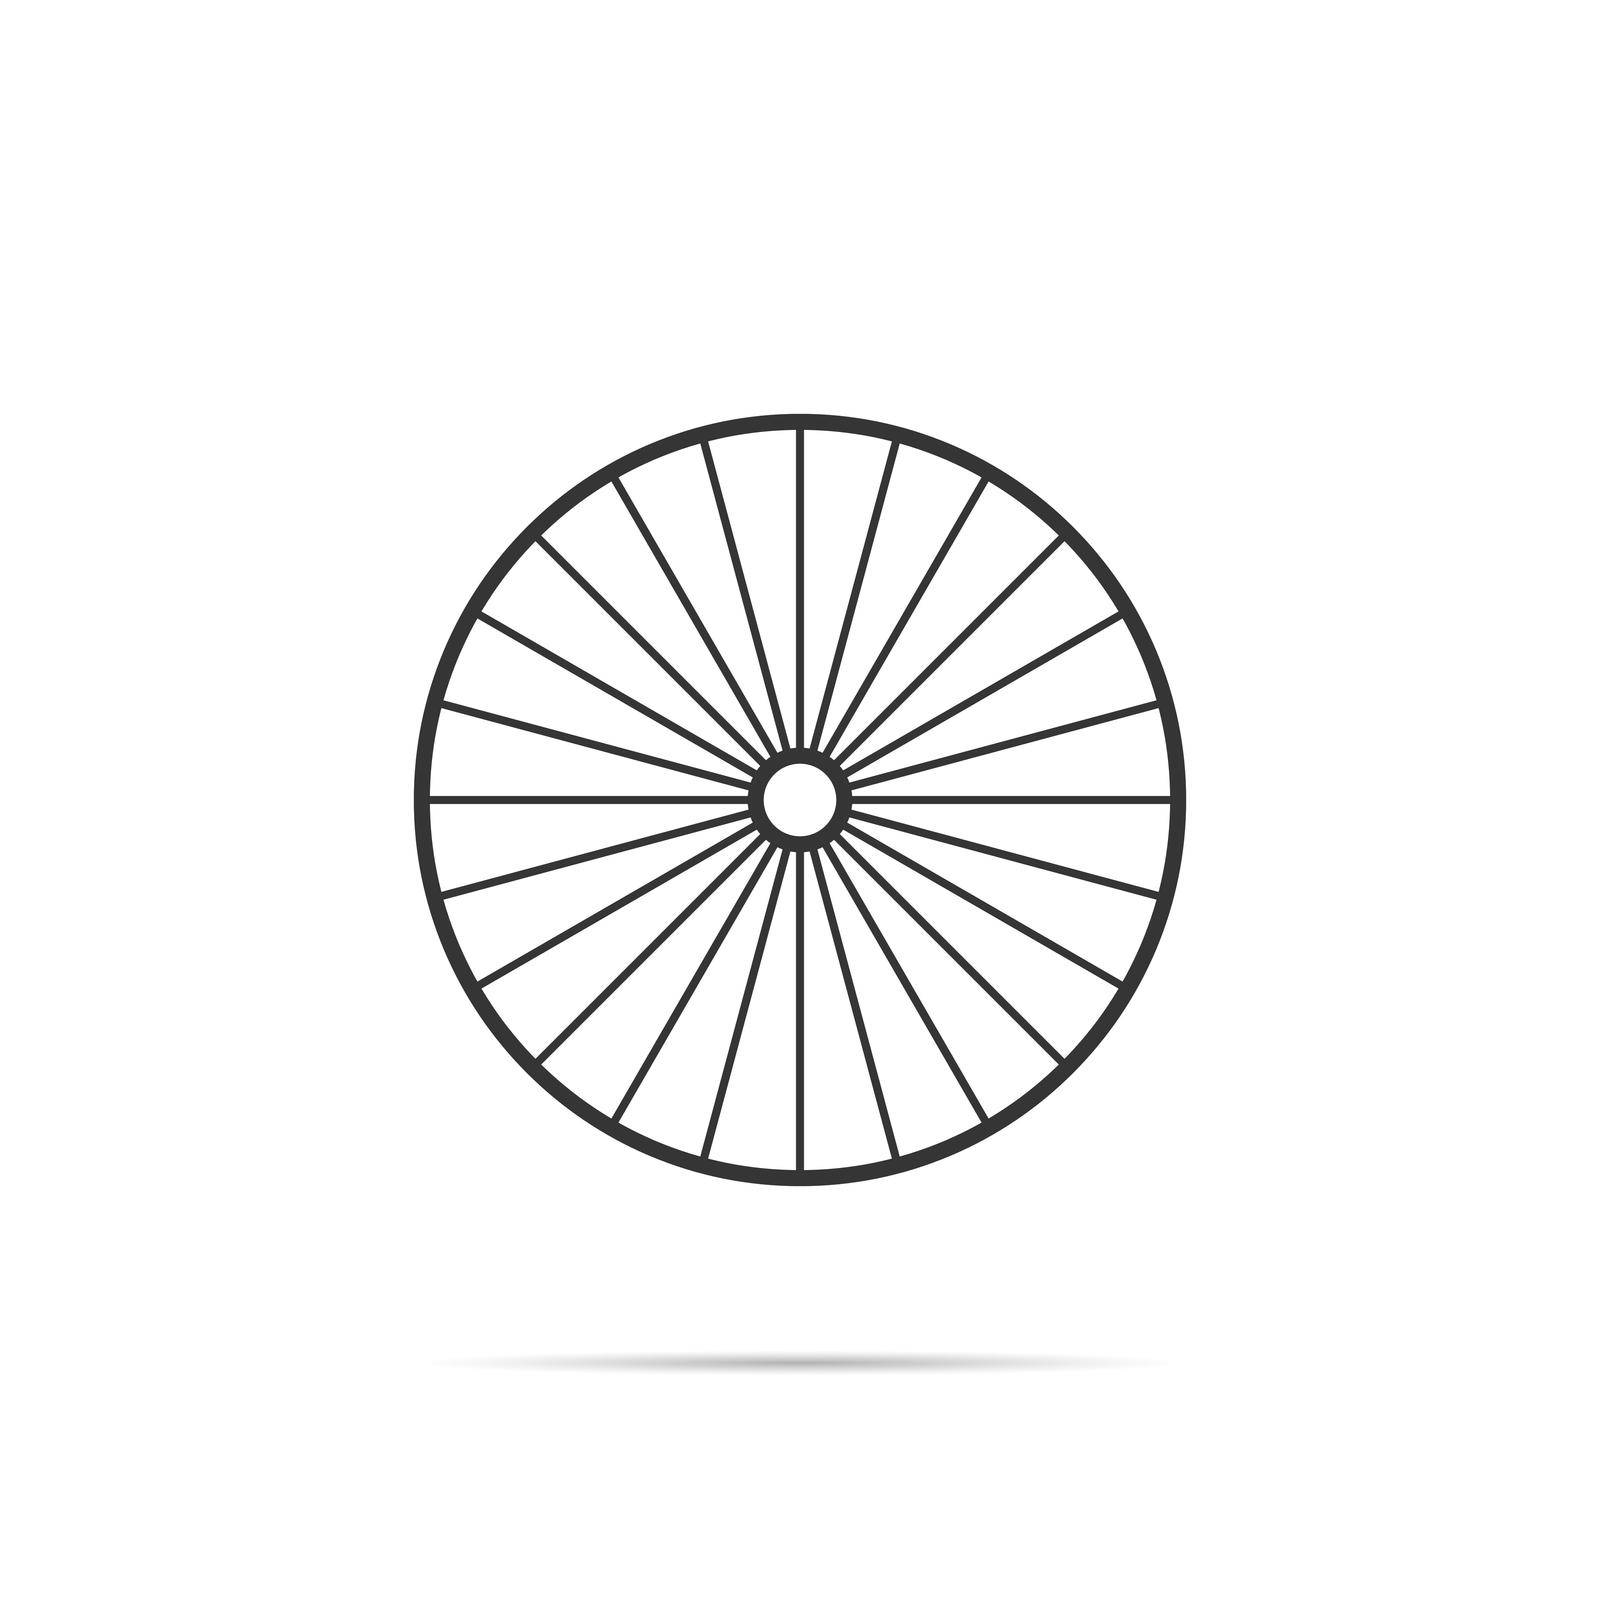 Bicycle wheel icon with shadow. Vector eps10